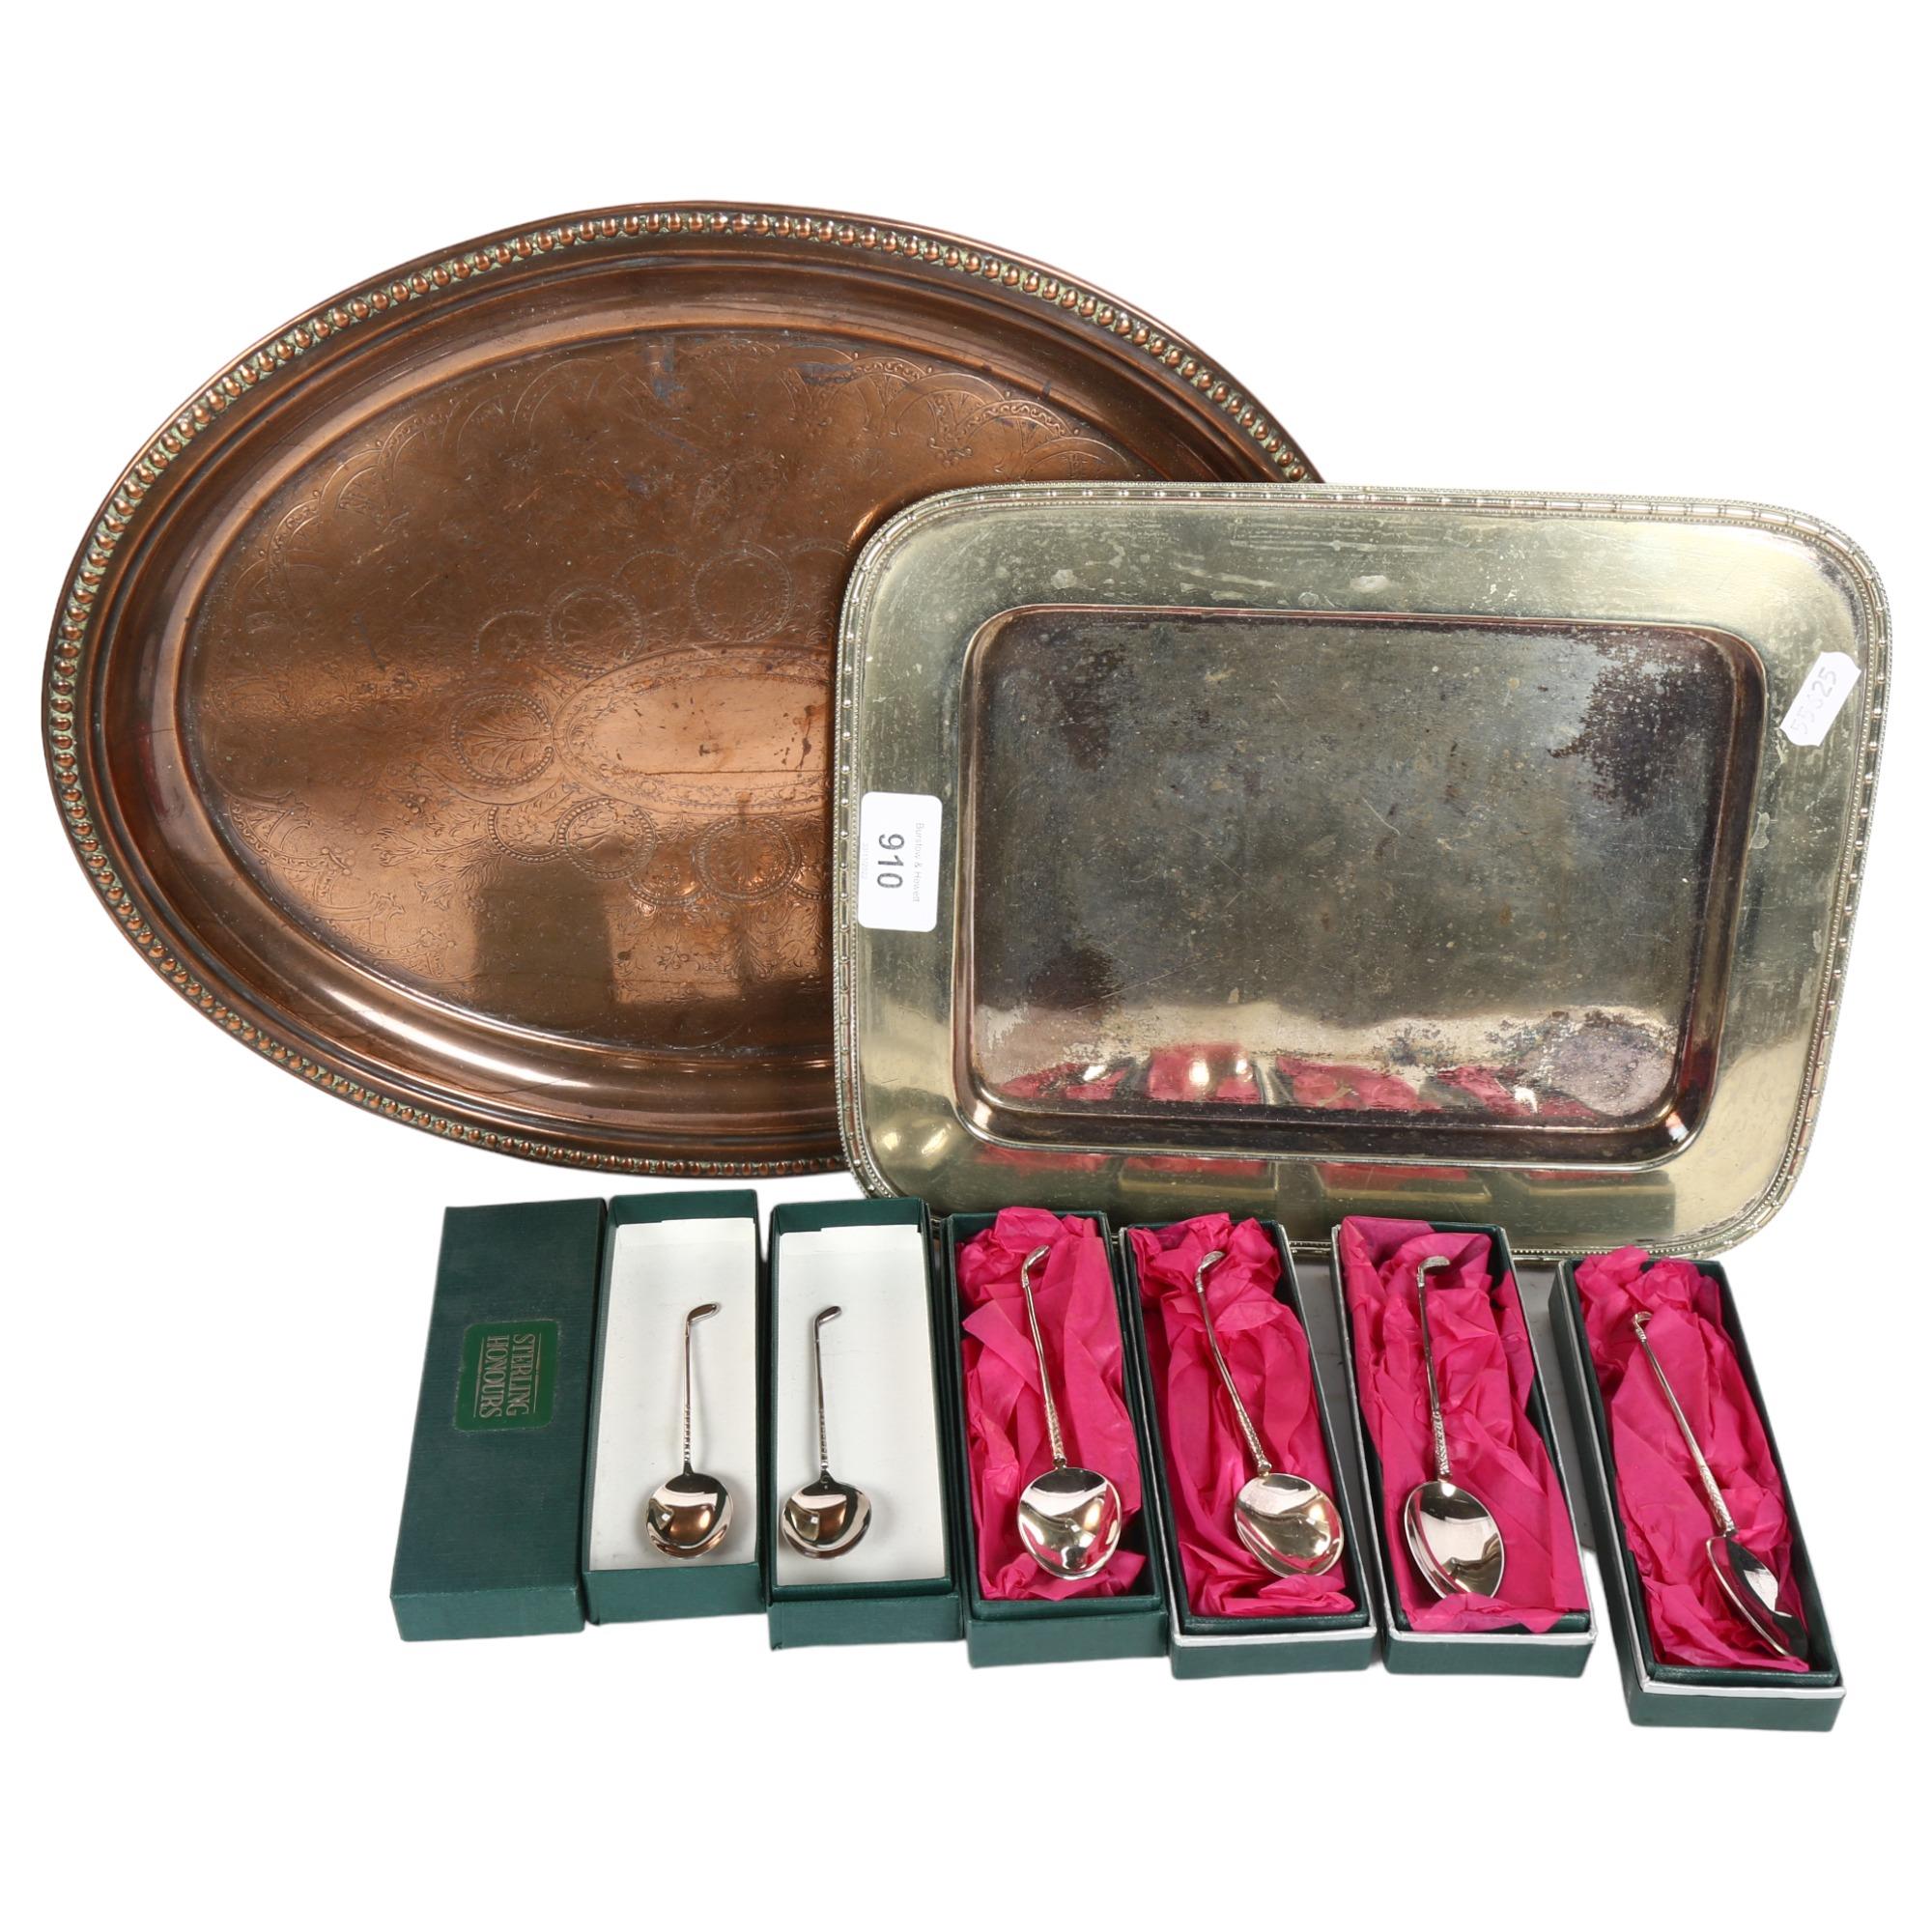 A set of 6 modern silver teaspoons, with golf club handles, and 2 silver plated serving trays